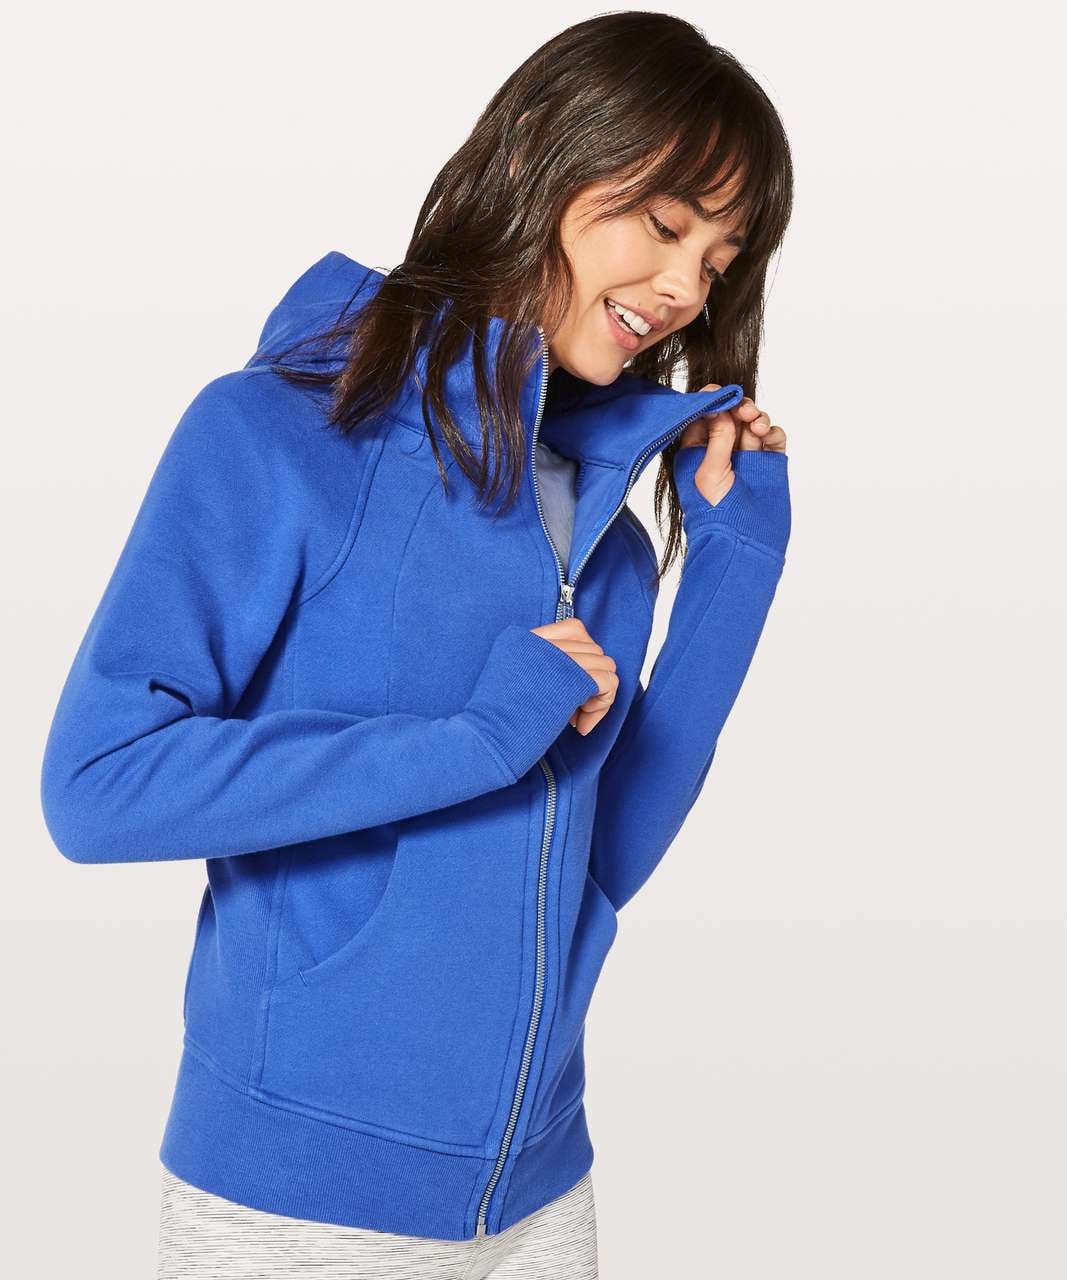 Lululemon Scuba Hoodie Light Cotton Fleece, 12 Must-Have Pieces That Will  Get You Pumped to Hit the Gym — All From Lululemon